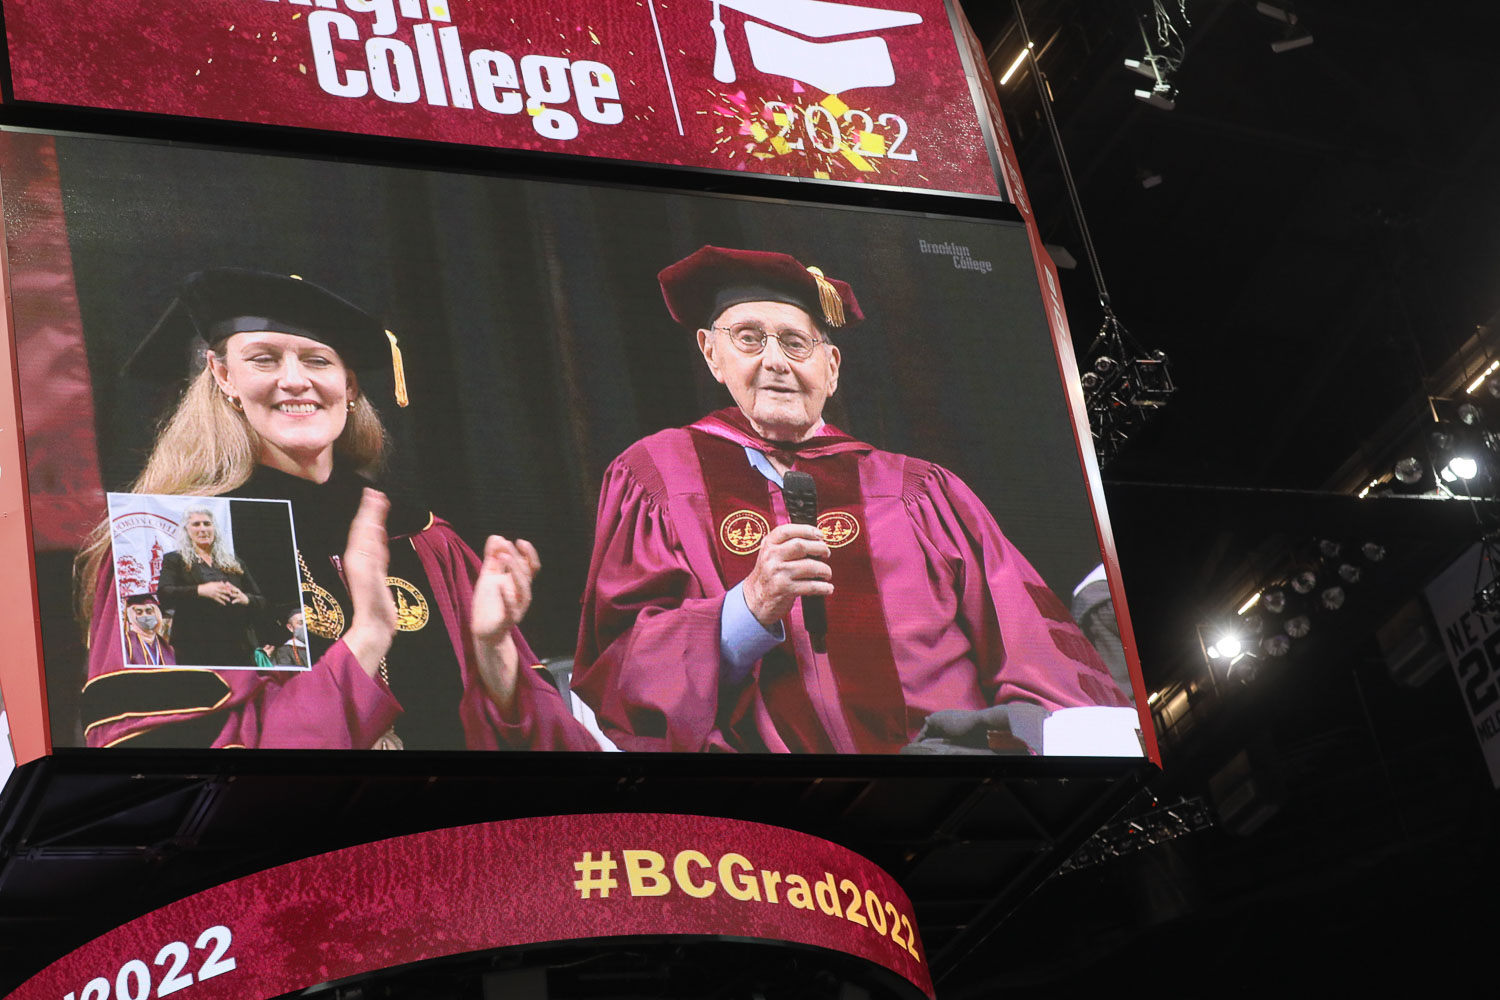 President Michelle J. Anderson and Distinguished Alumnus and Brooklyn College Foundation Trustee Leonard Tow ’50 appear on the jumbo screen at the 2022 Brooklyn College Commencement at Barclays Center.